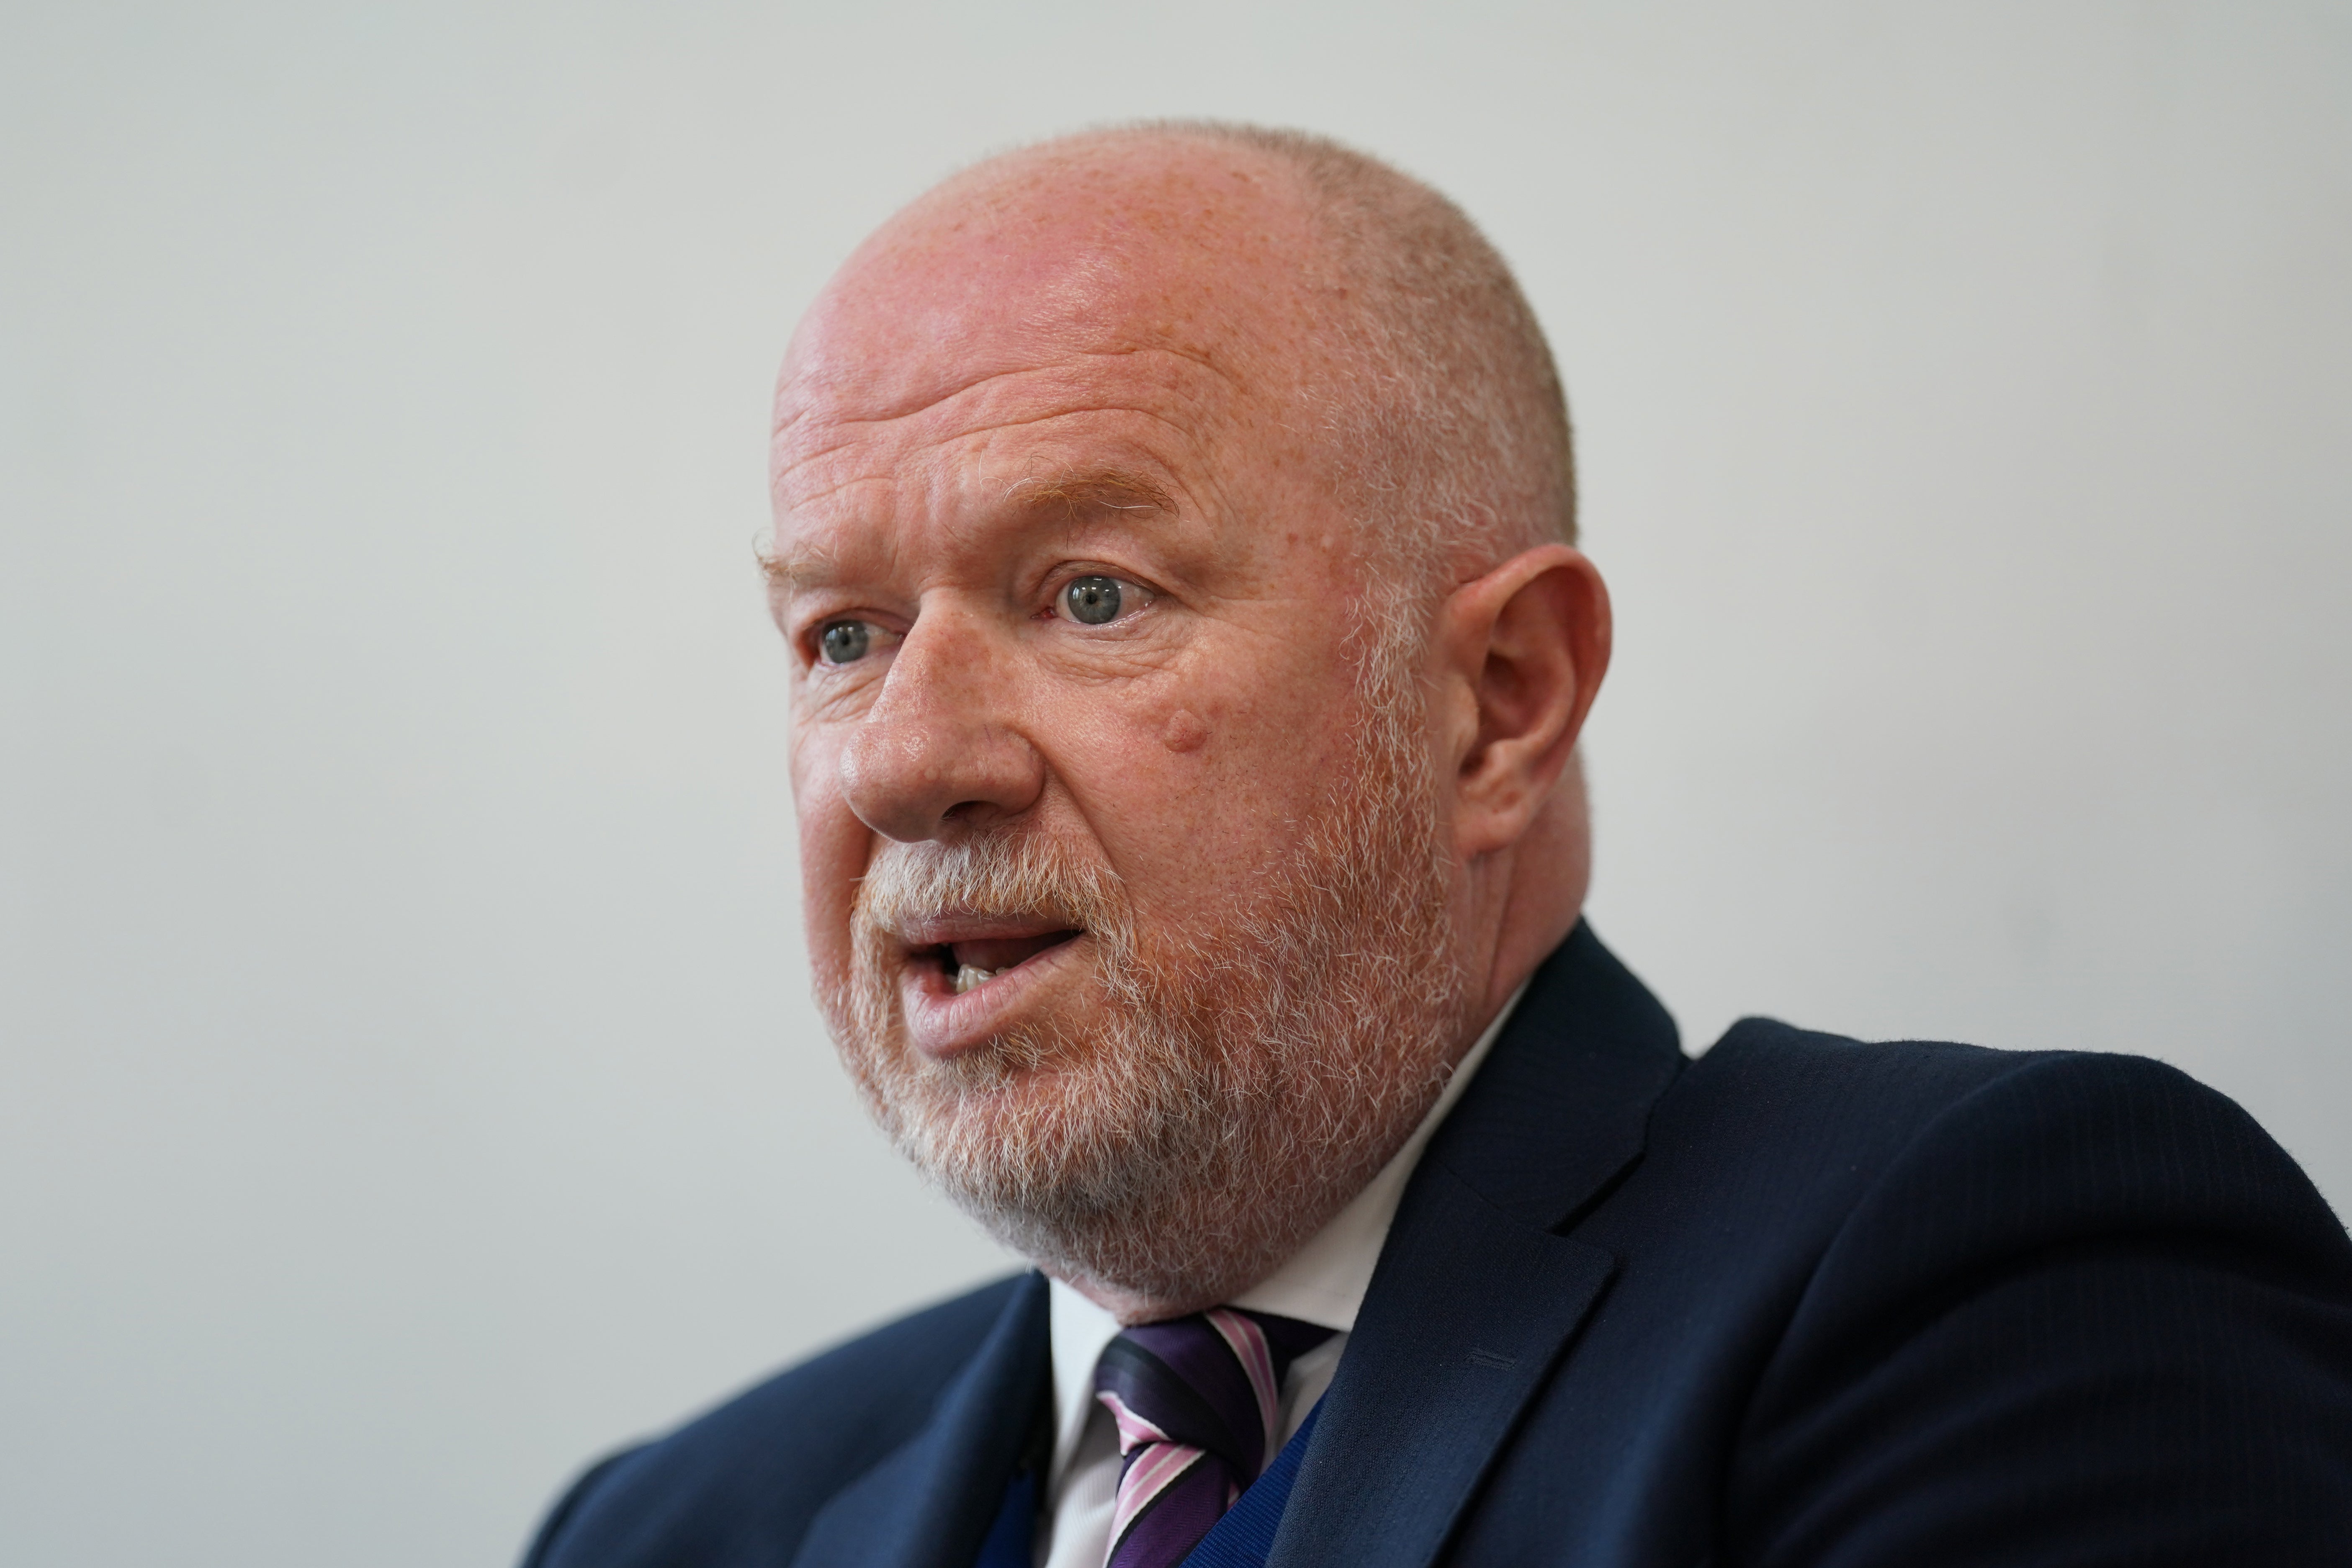 HM chief inspector of constabulary Andy Cooke has said policing of burglary, robbery, and theft ‘isn’t consistently good enough’ (Kirsty O’Connor/PA)